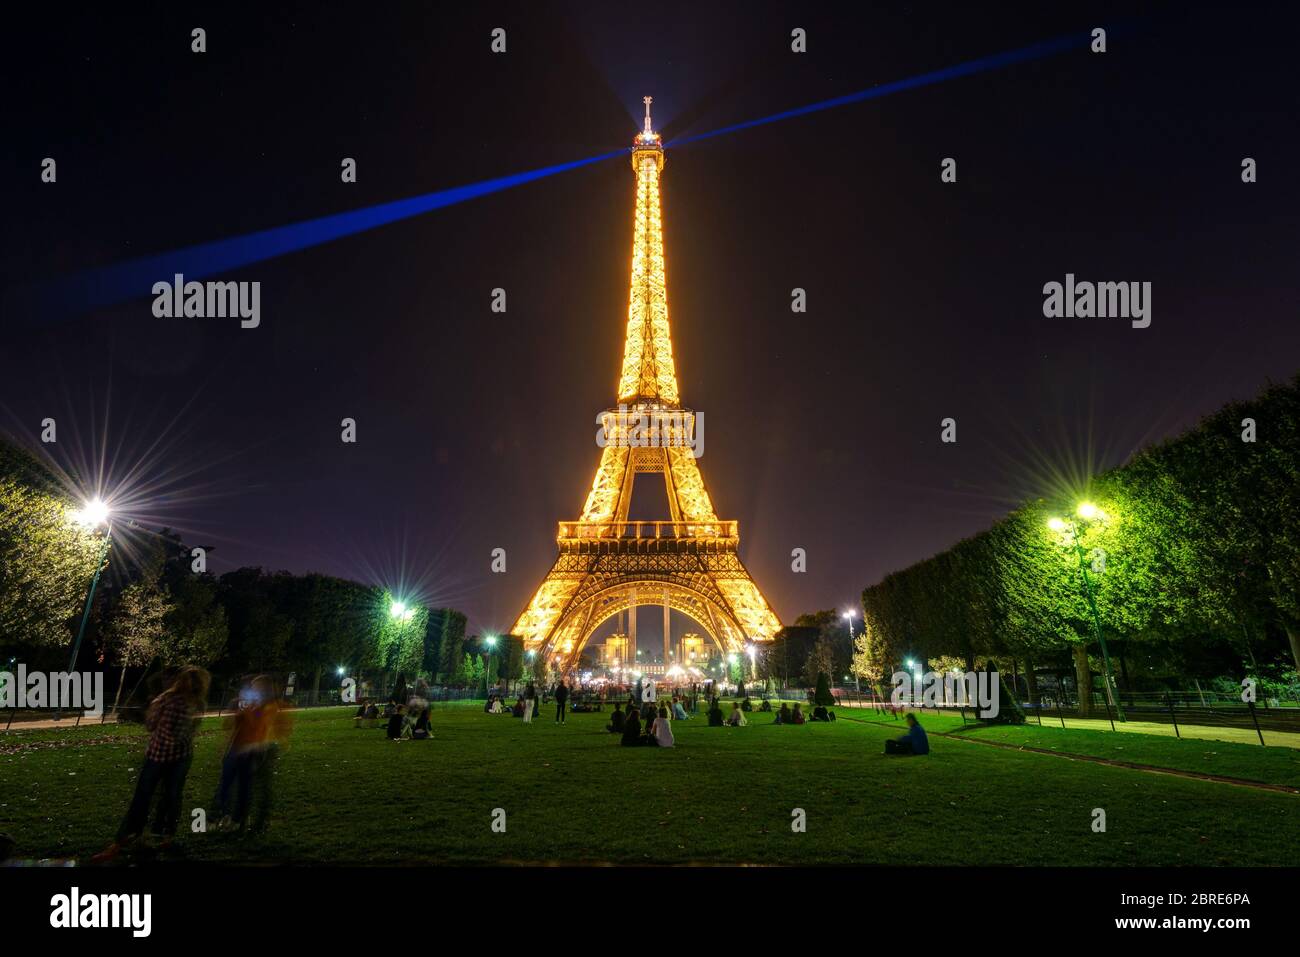 PARIS - SEPTEMBER 24: Lighting of the Eiffel tower at night on september 24, 2013 in Paris. The Eiffel tower is one of the major tourist attractions o Stock Photo